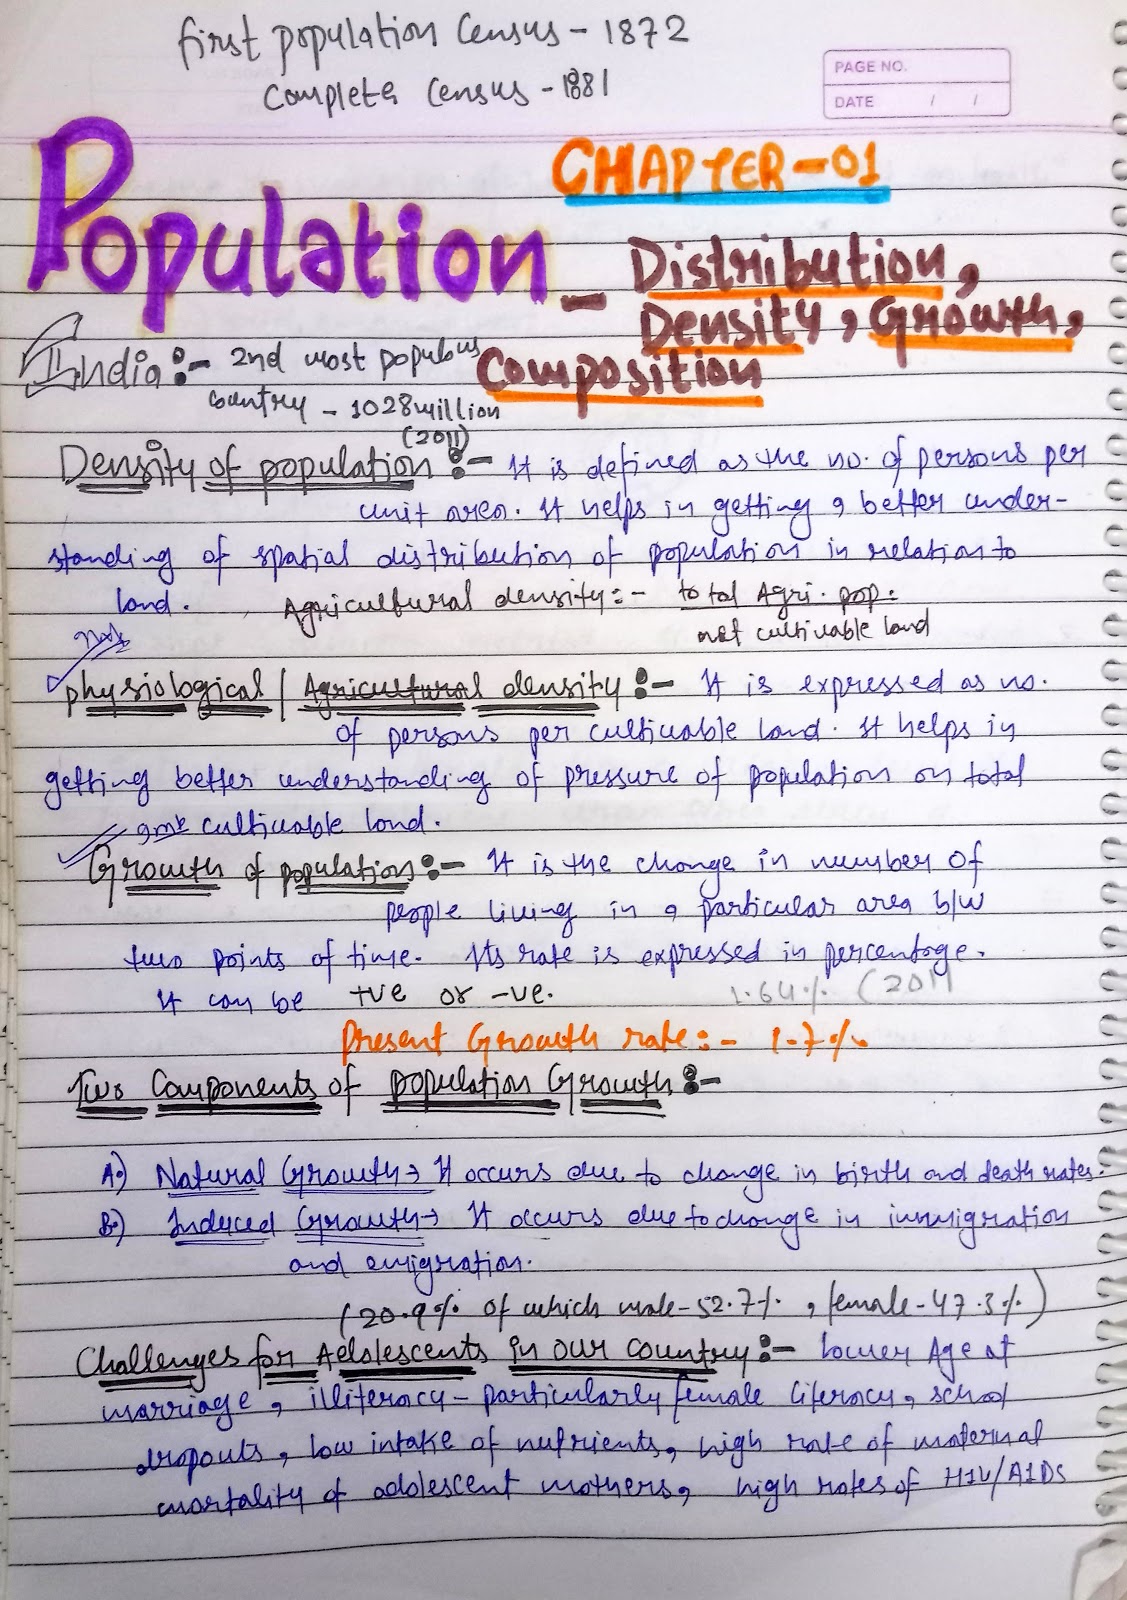 write short note on population in research